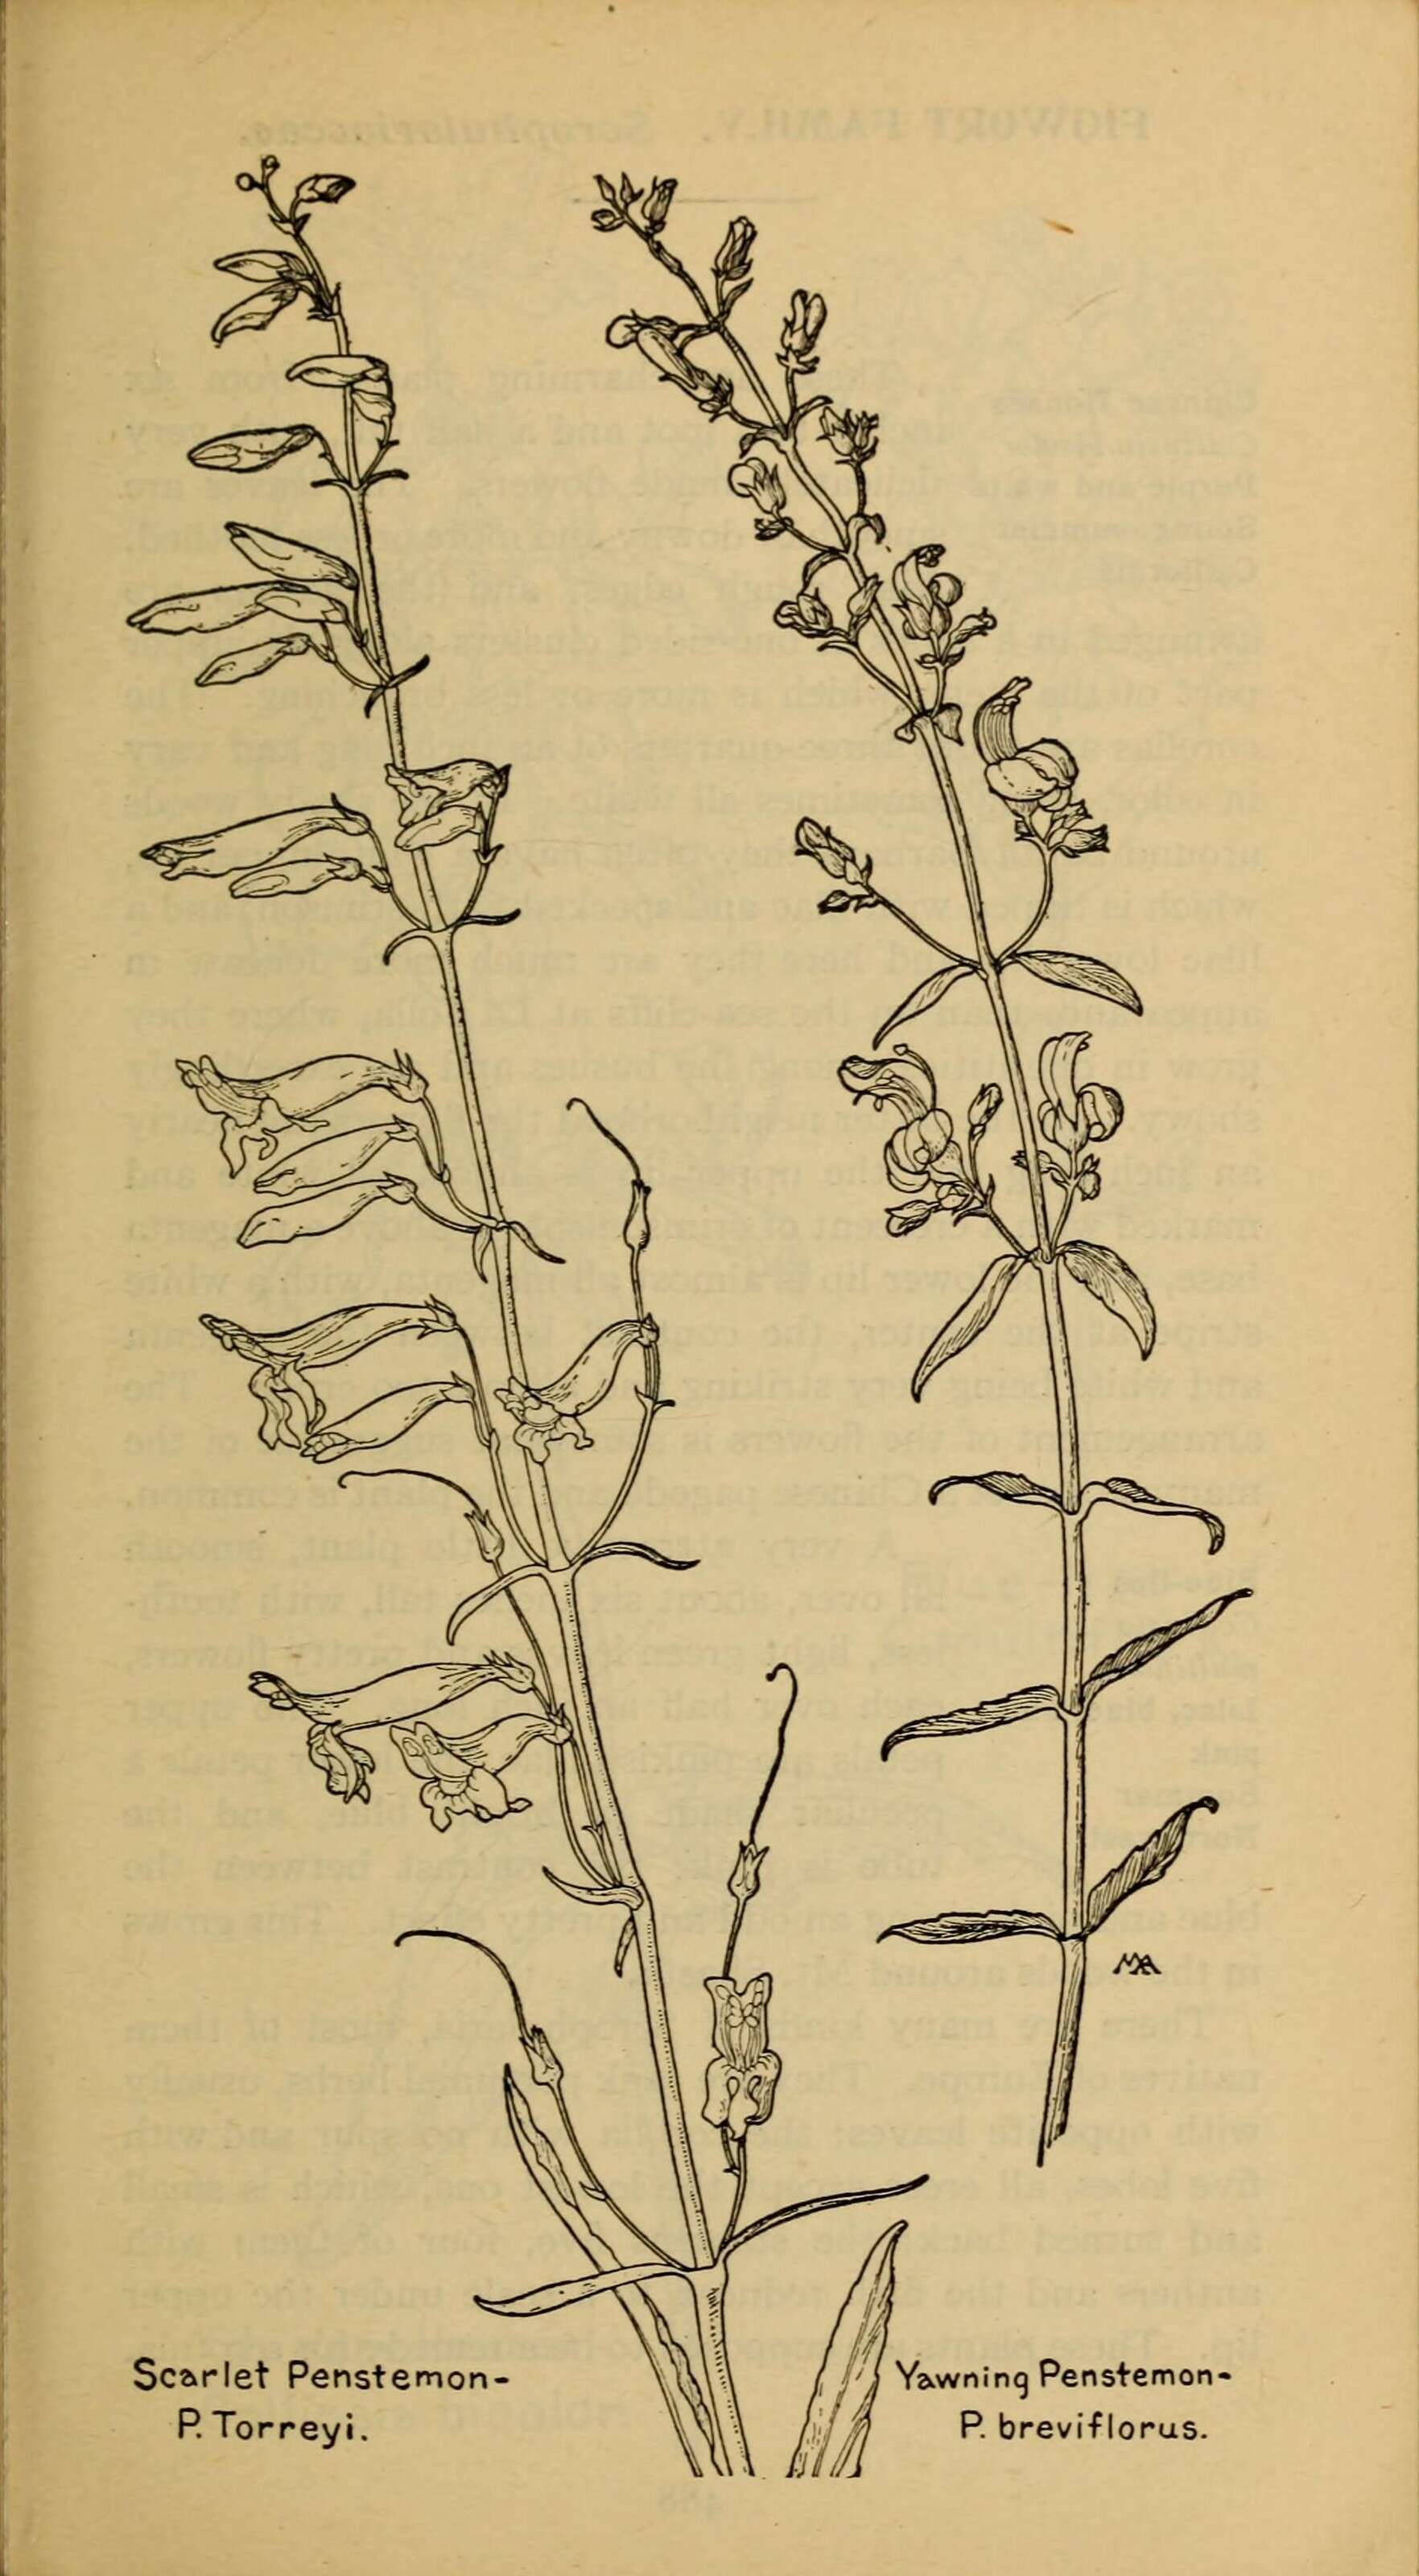 Image of figwort family